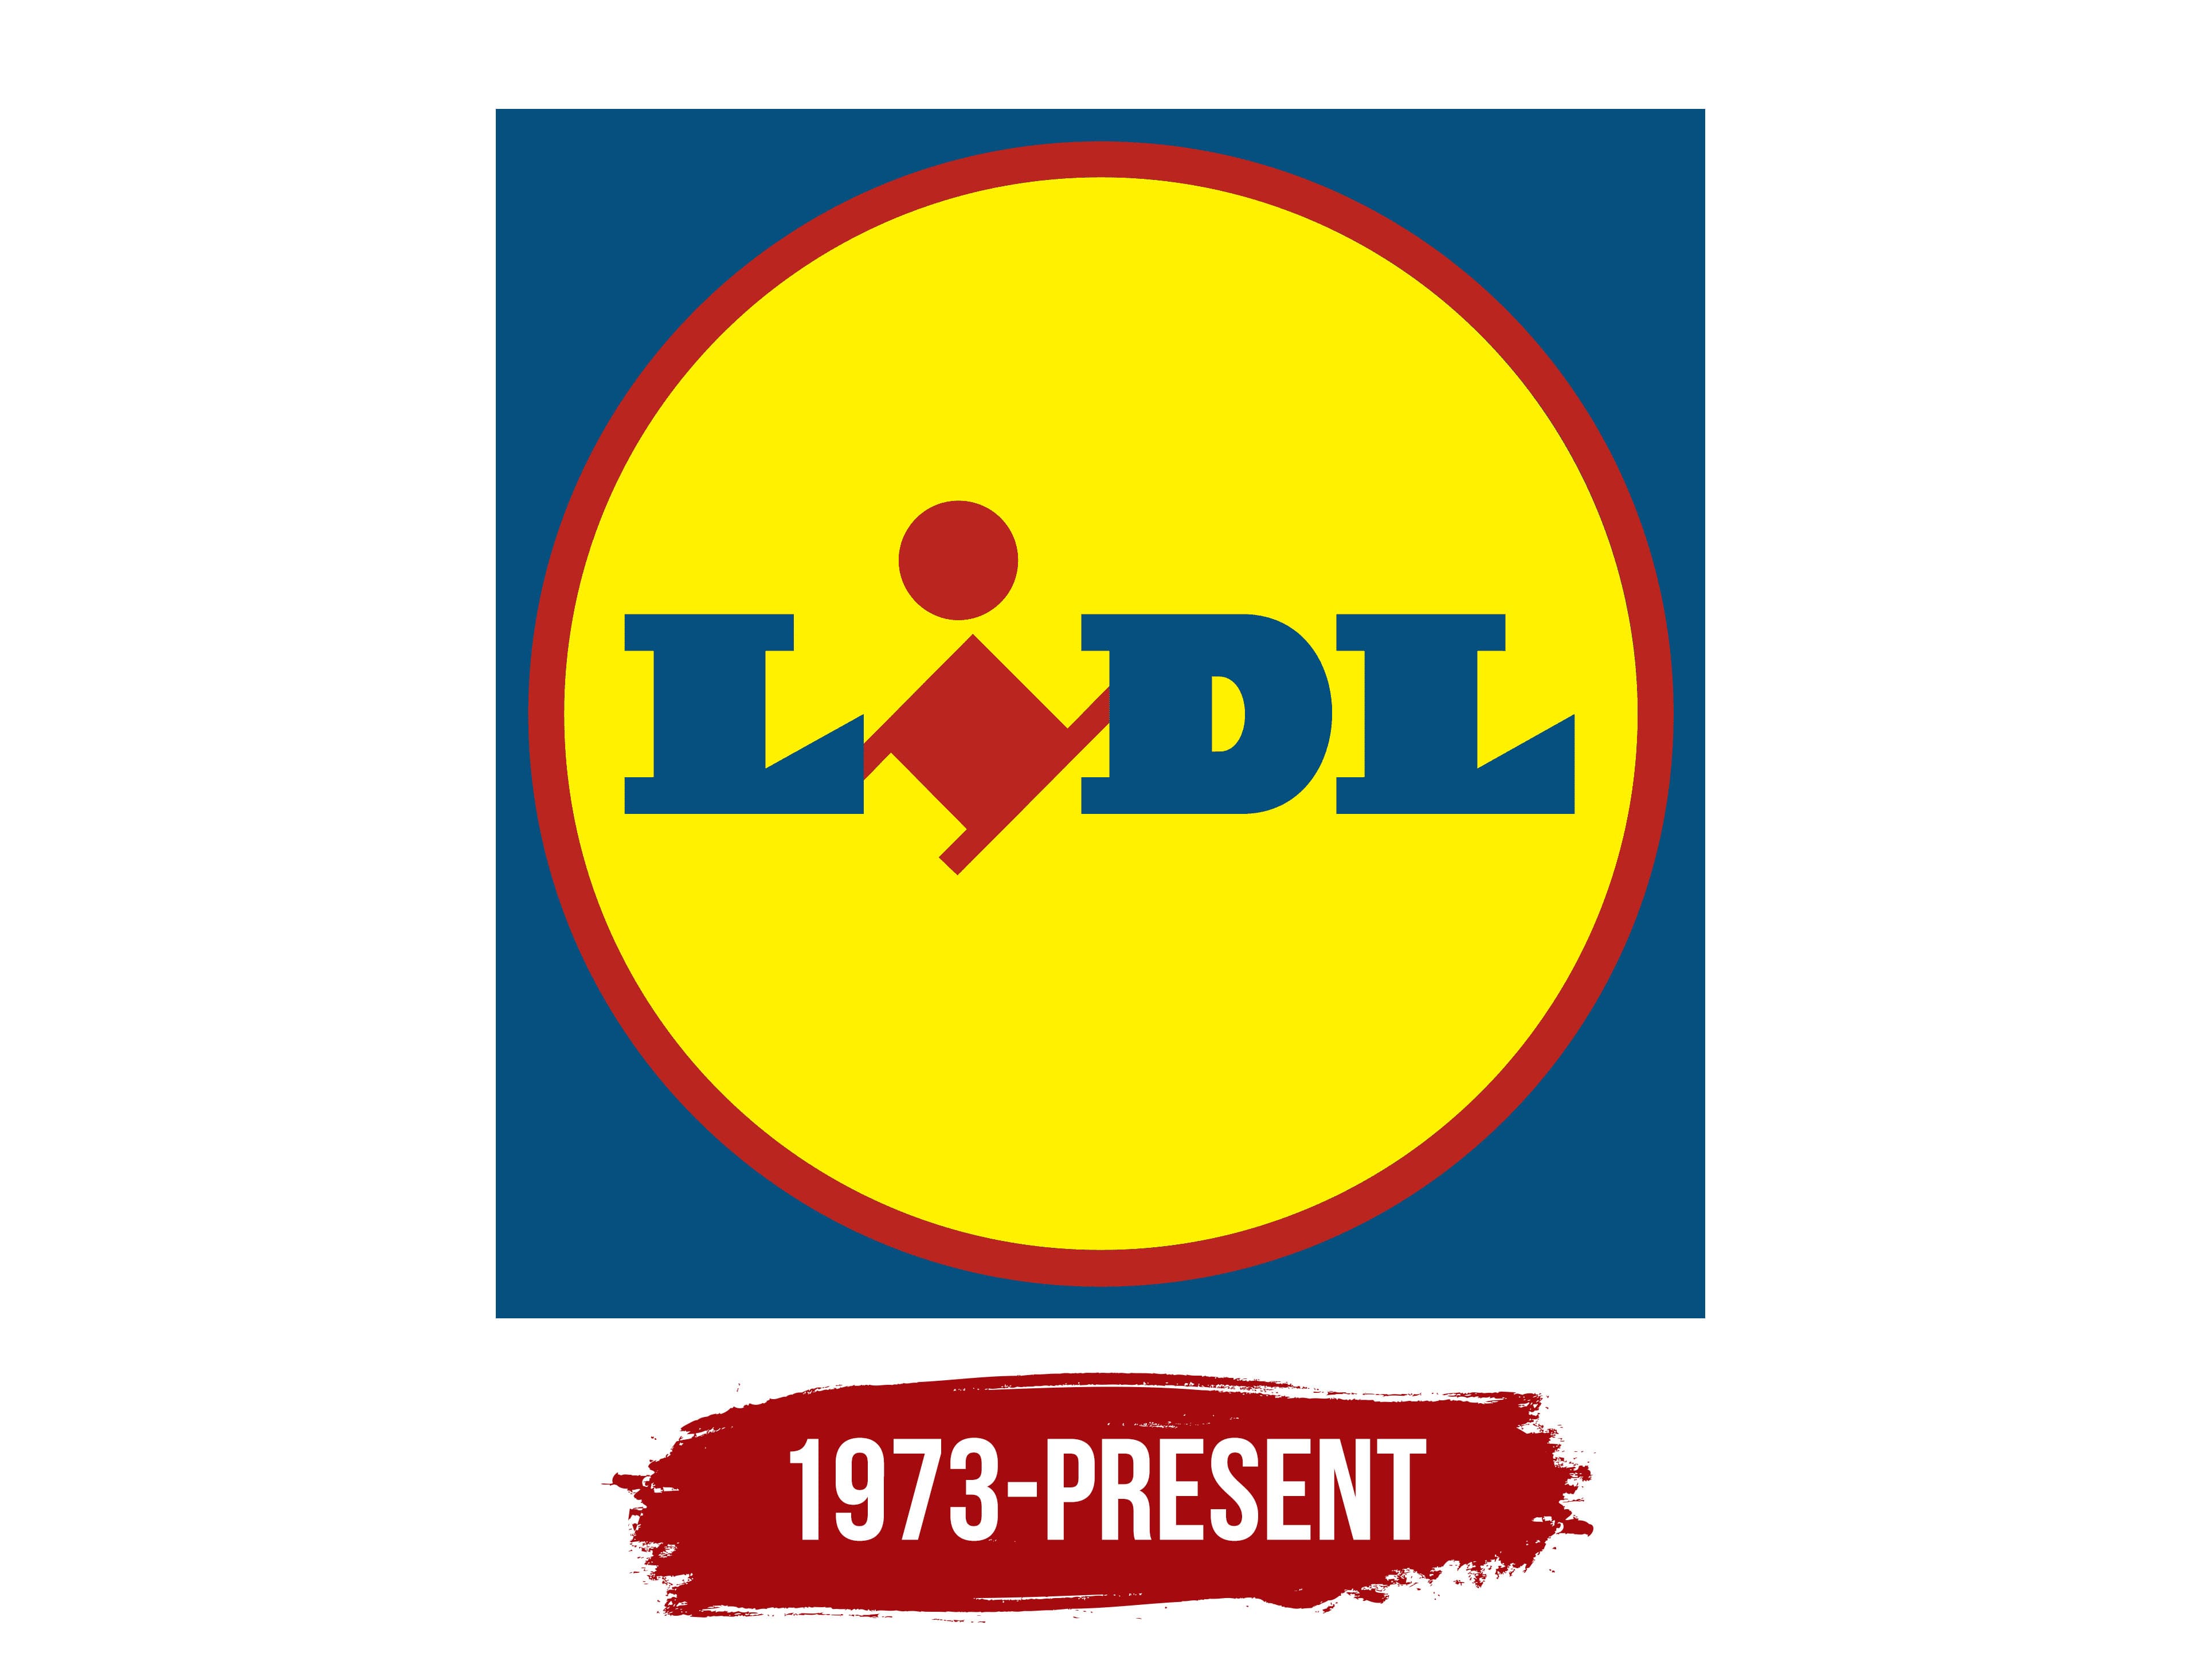 Vermeend Touhou Cursus Lidl Logo, symbol, meaning, history, PNG, brand